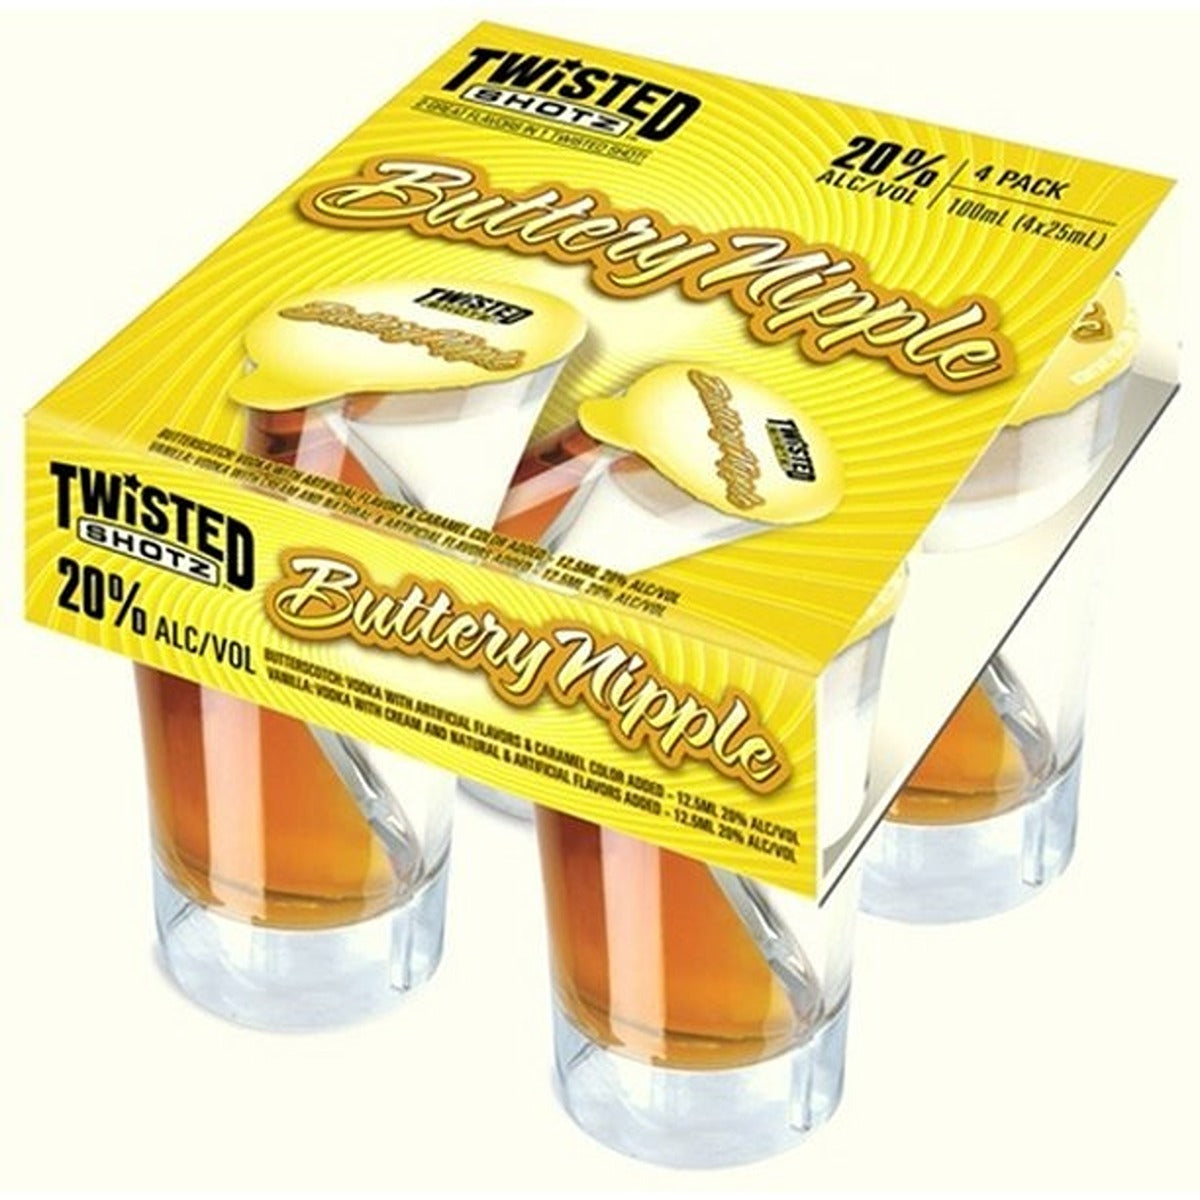 TWISTED BUTTERY NIPPLE 4PK